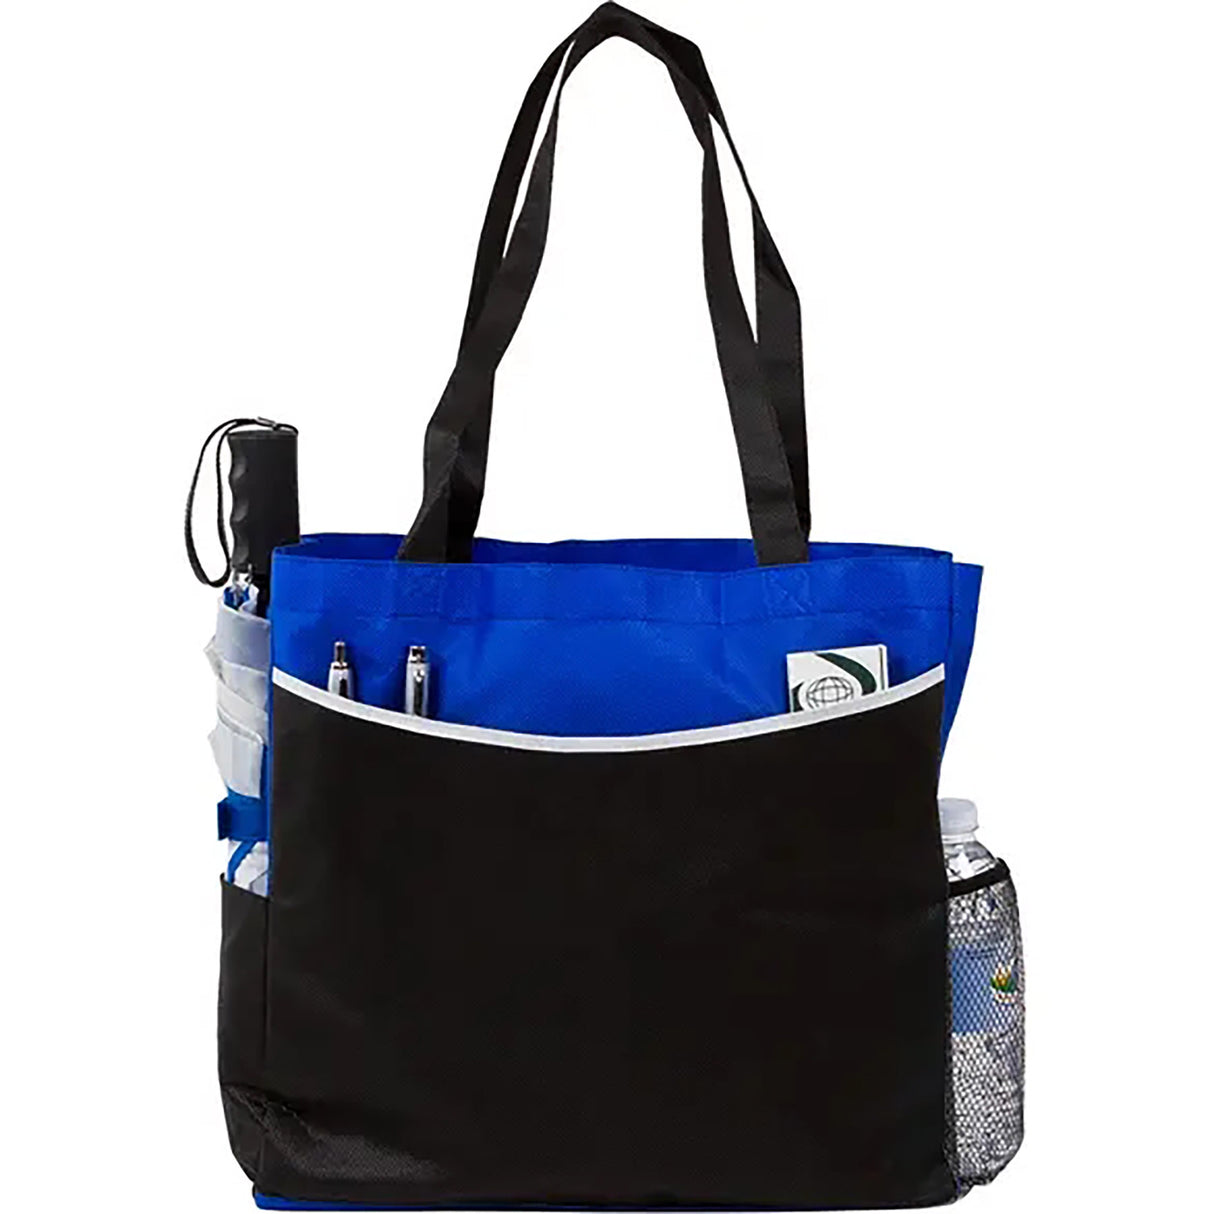 Tradeshow Conference Tote Bag - By Boat